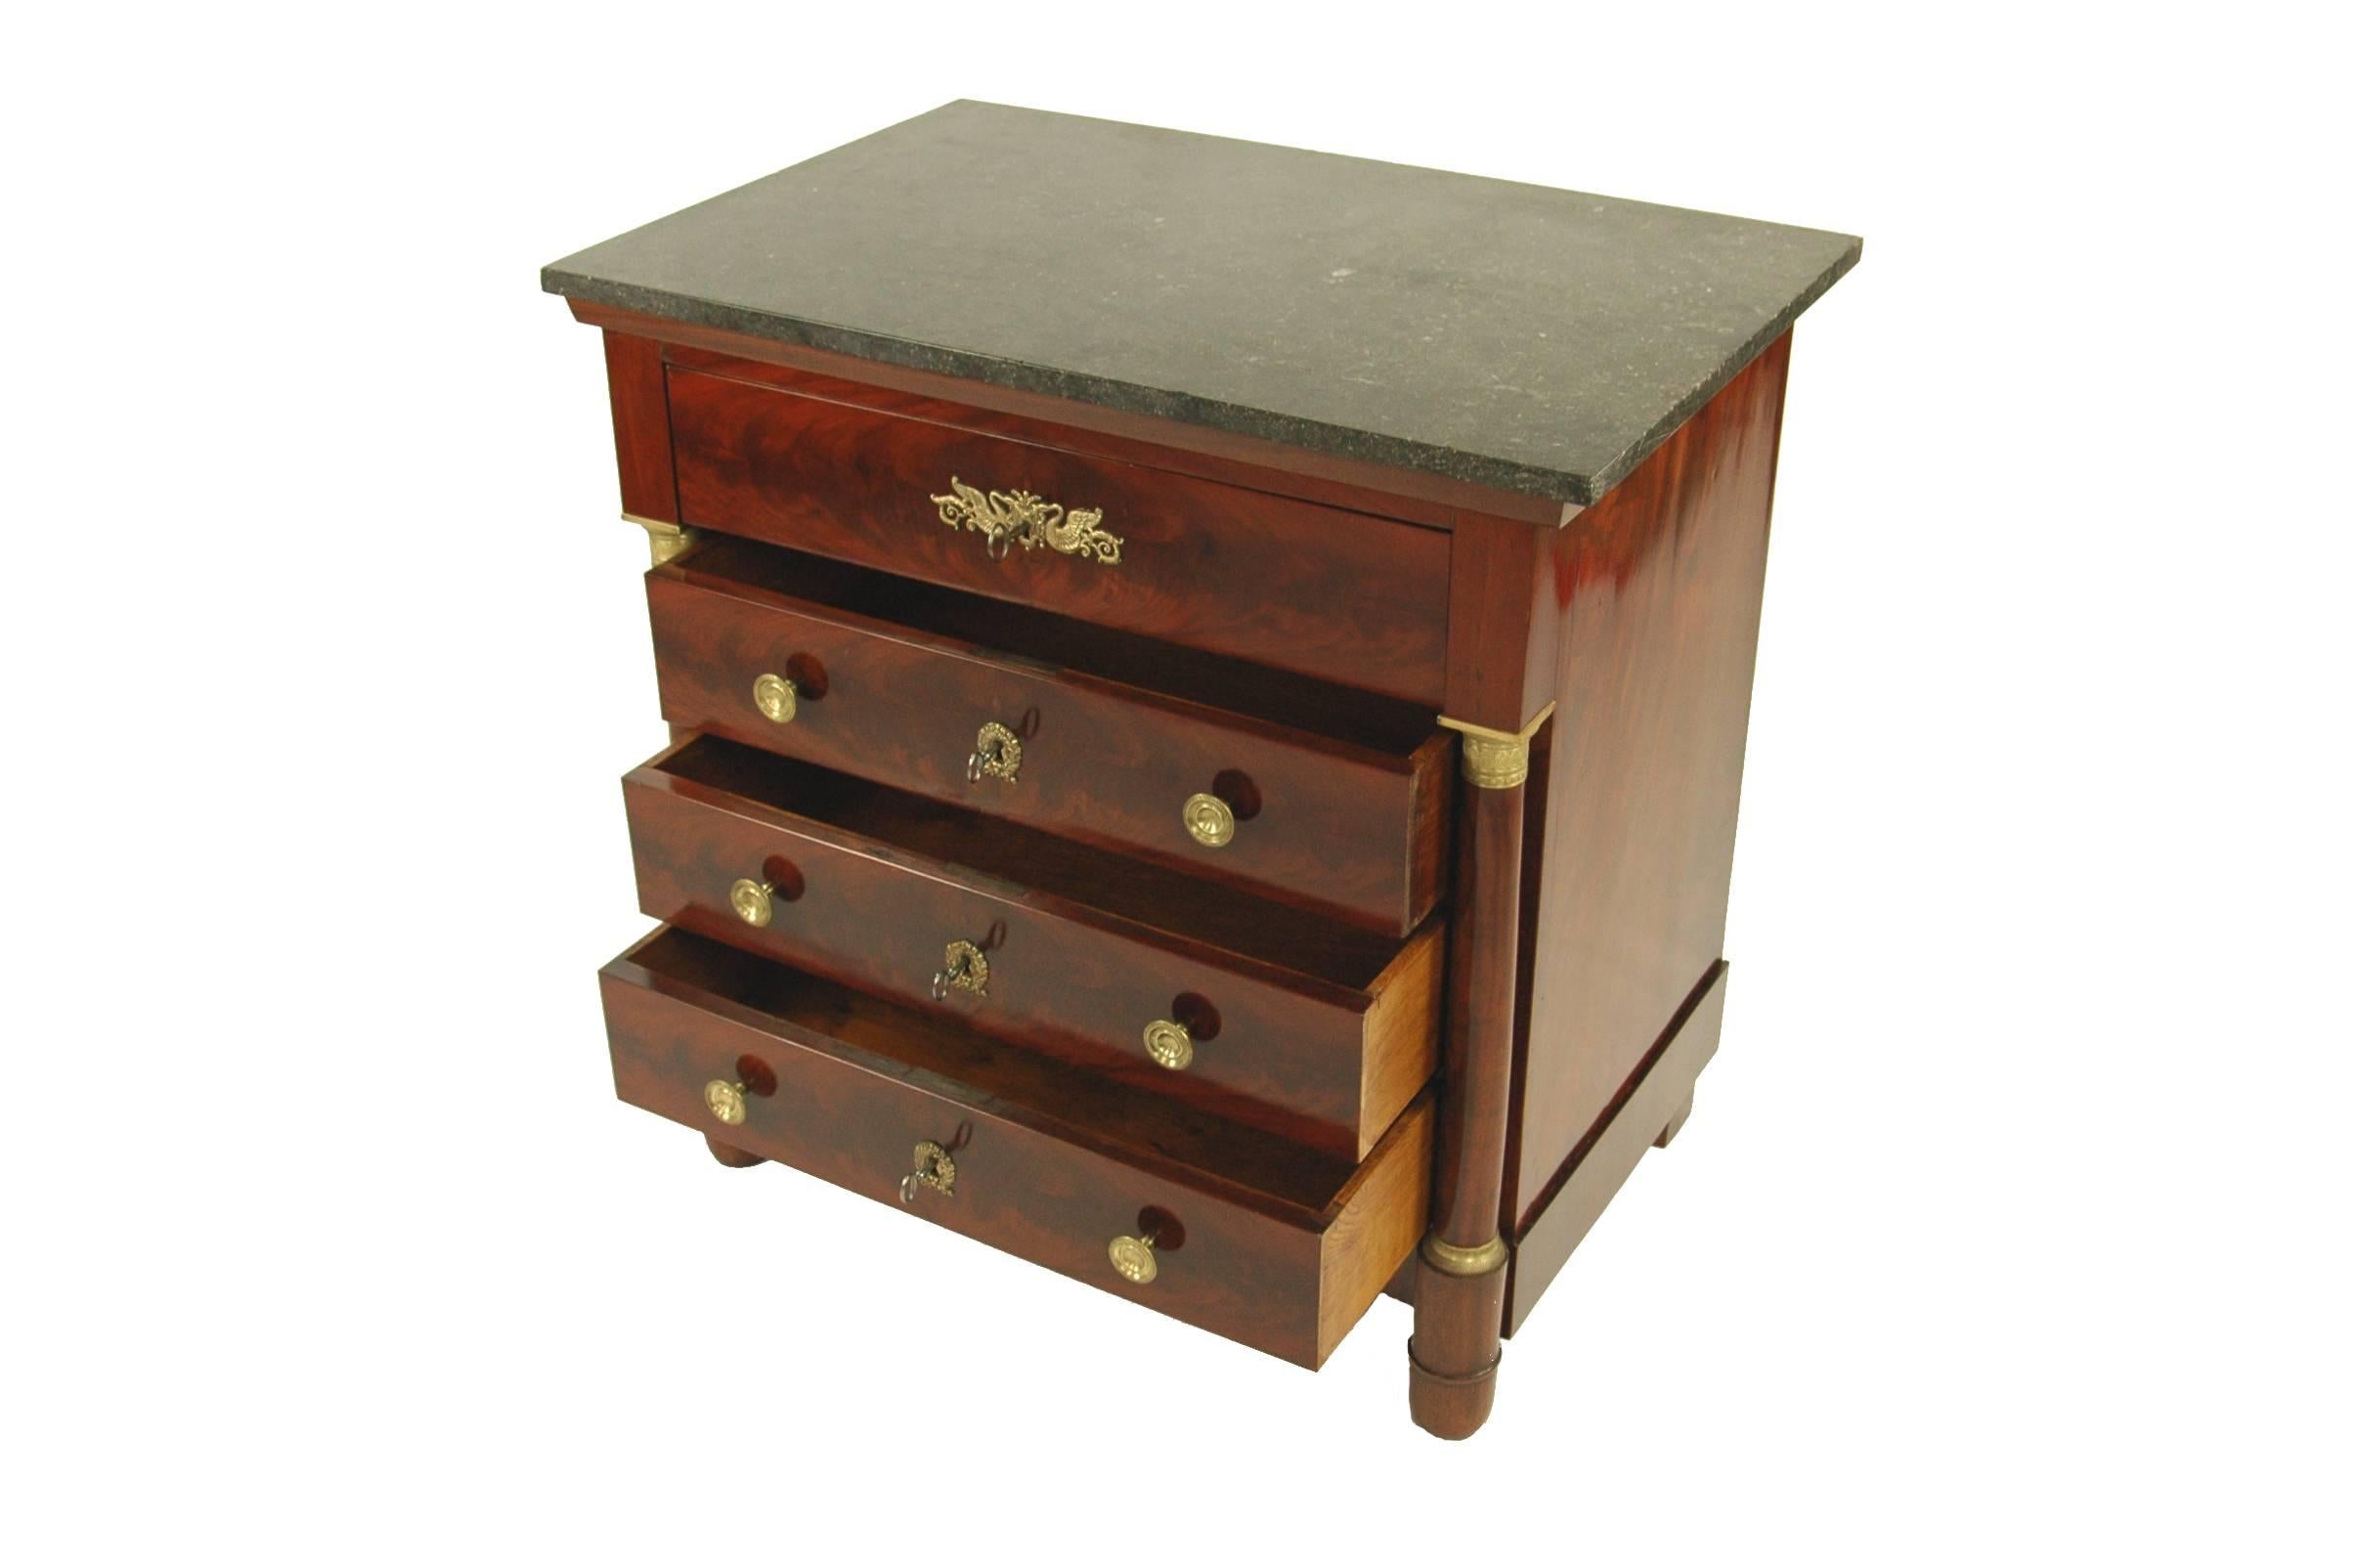 Mahogany on oak body veneered
France, circa 1810
Four drawers
Marble top
Full columns
Restored state
French shellac hand polish
Measures: Height 83.5 cm, width 84 cm, depth 56 cm

Delivery can be made to your door within 7 days worldwide.